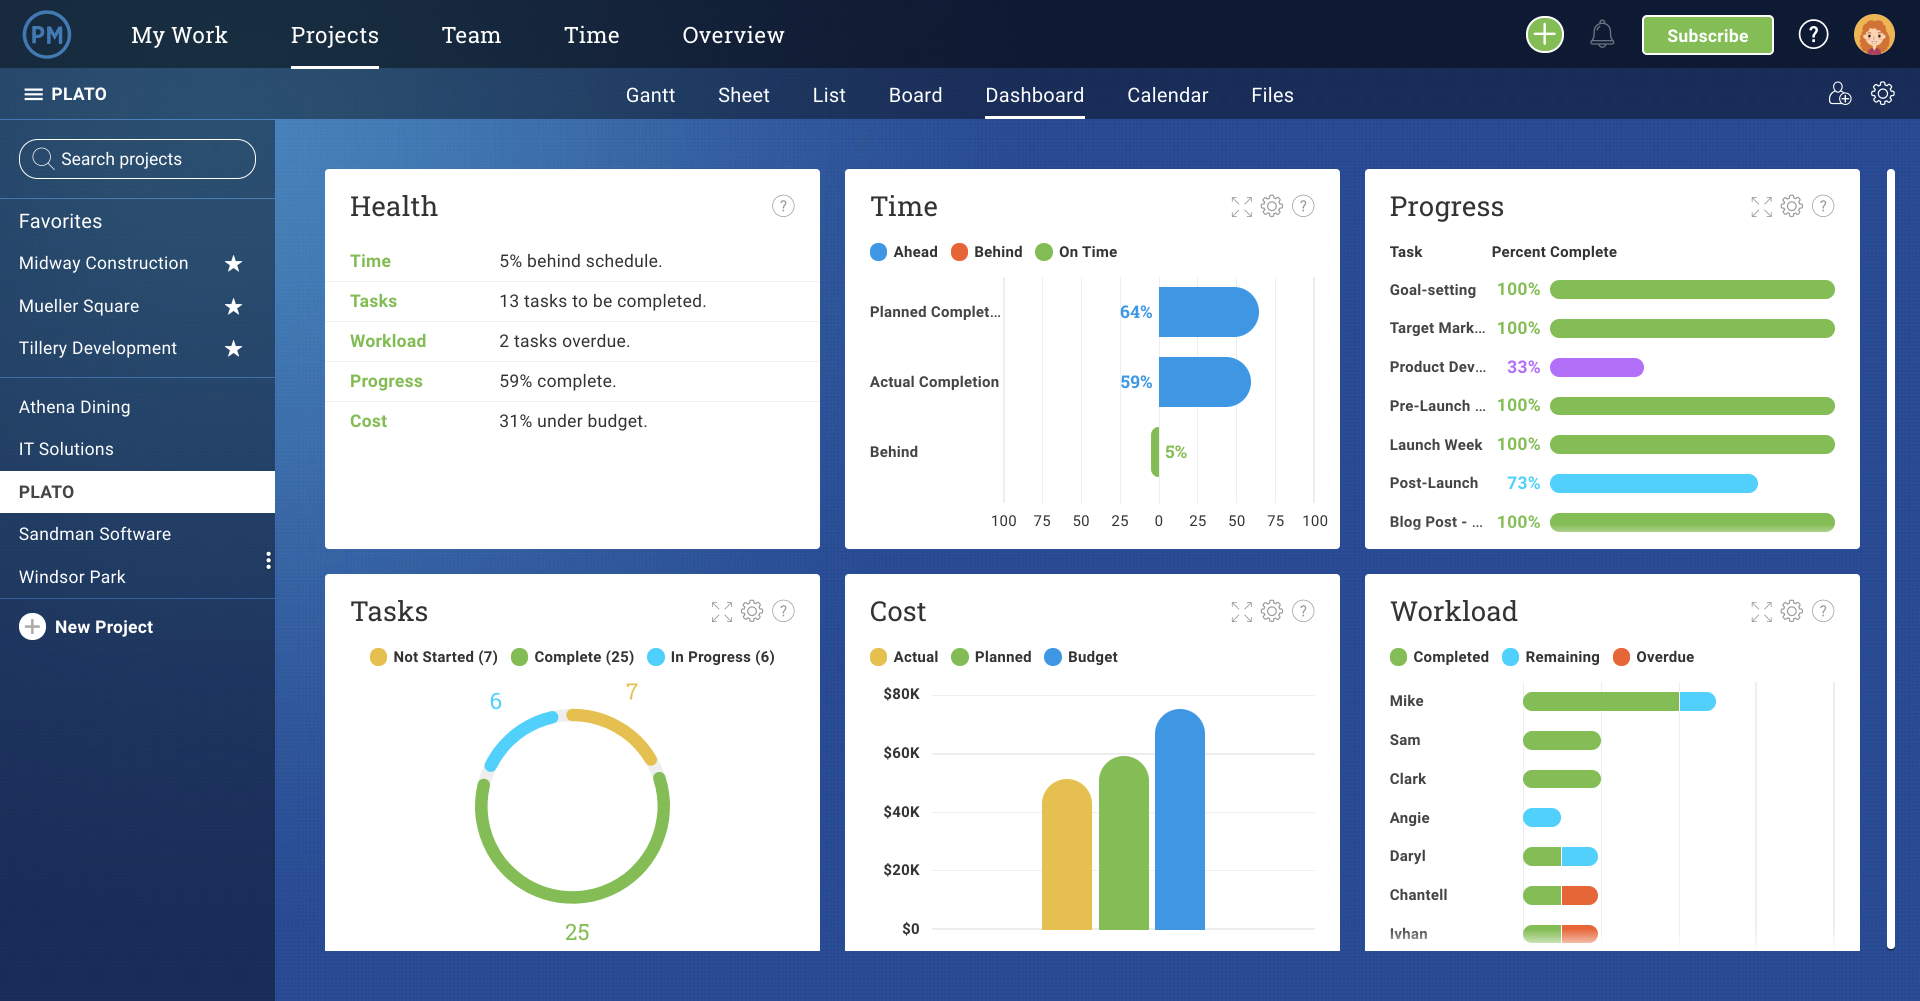 screenshot of the dashboard in ProjectManager.com